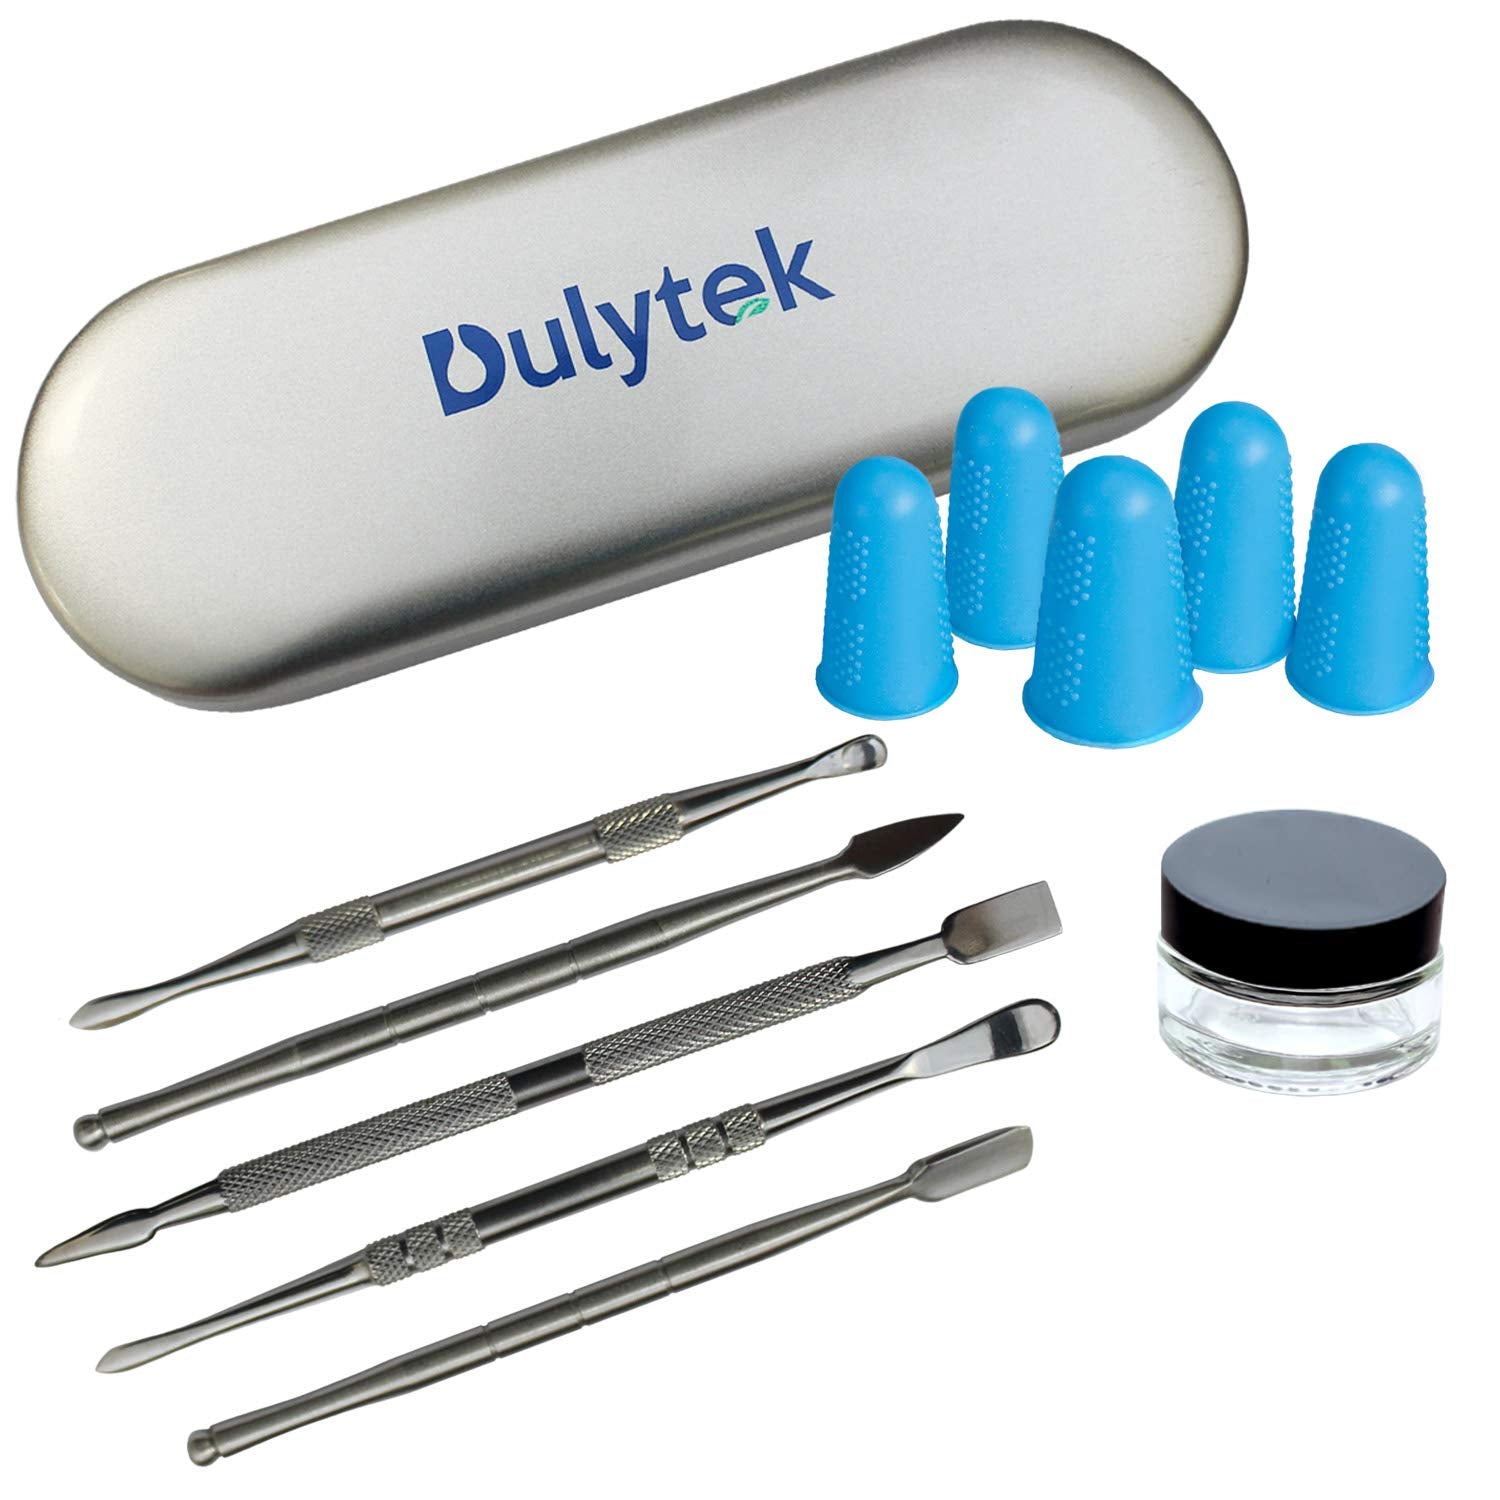 Dulytek 7-Piece Wax Carving & Collecting Tool Set with Thick Glass Jar, Silicone Finger Gloves and Metal Carrying Case